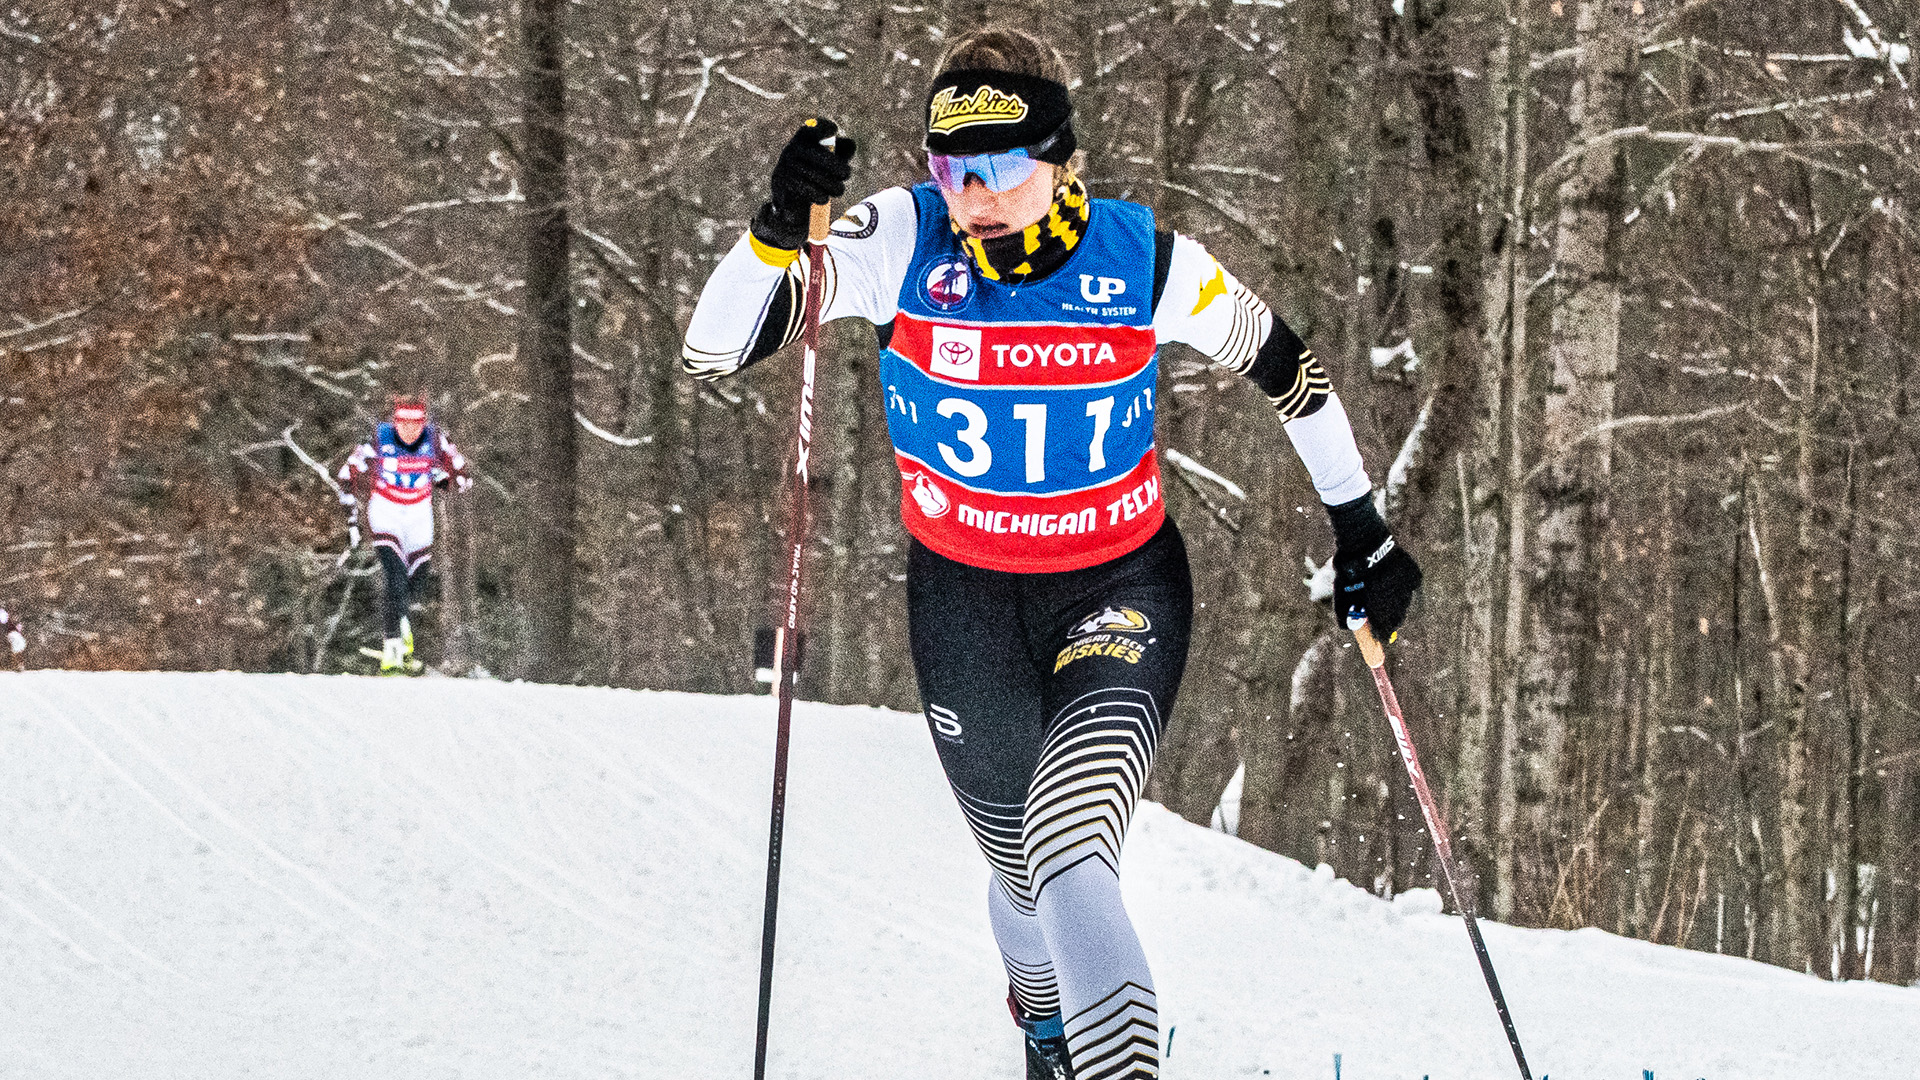 Huskies Complete Day Two of U.S. Cross Country Ski Championships